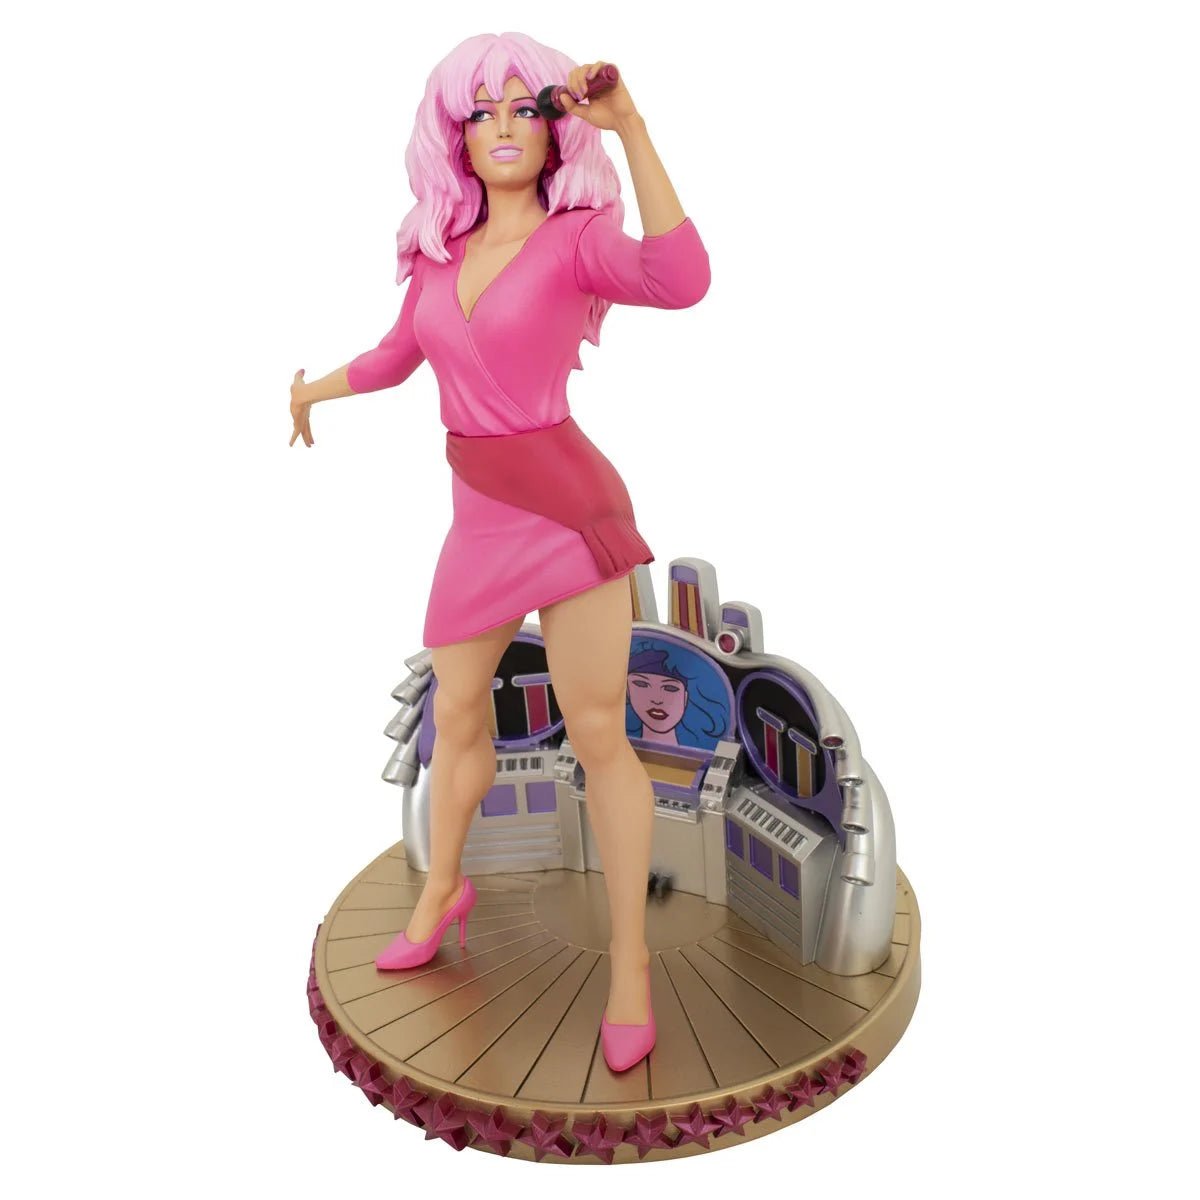 Jem and the Holograms Premier Collection Jem Statue Diamond Select - Simon's Collectibles